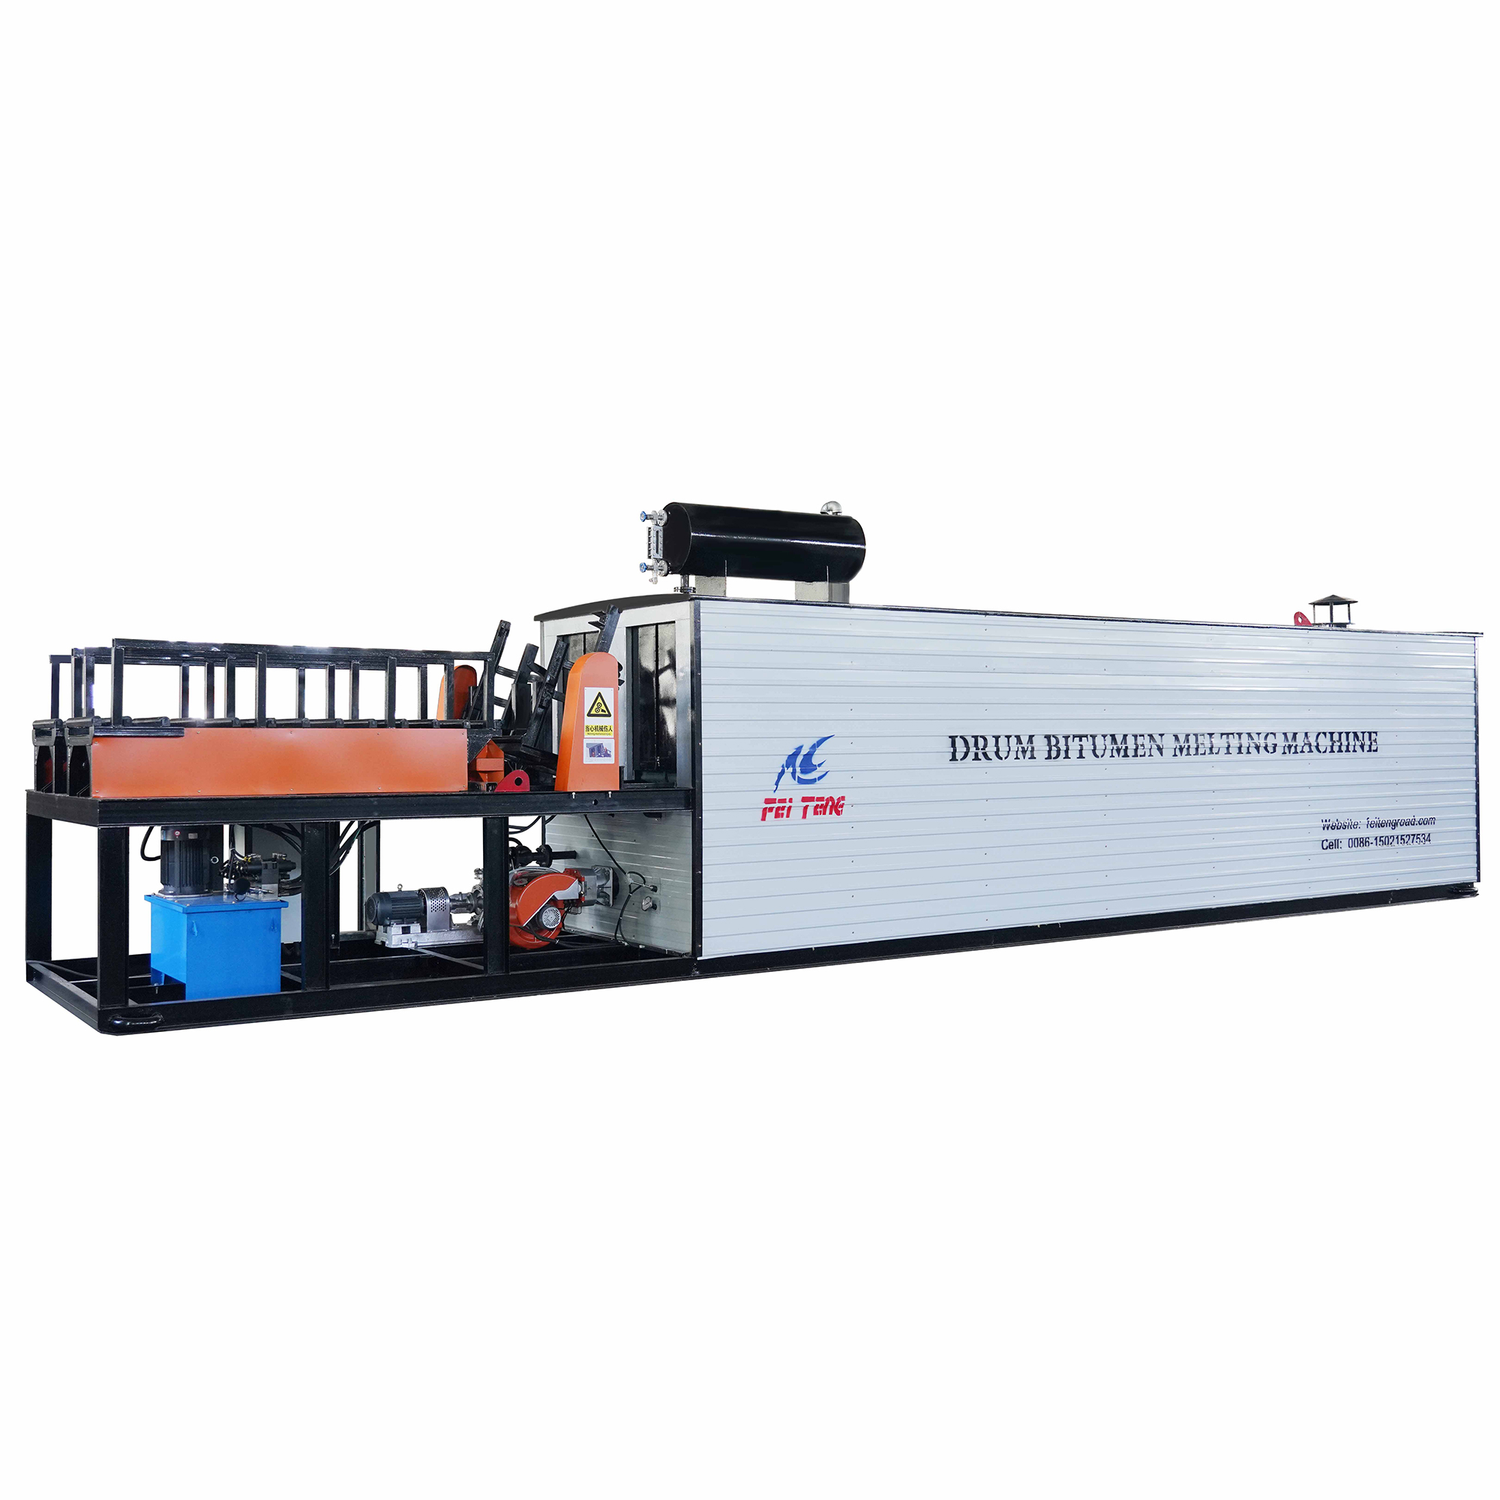 Automatic Bitumen Melting Equipment with Closed Structure and No Pollution